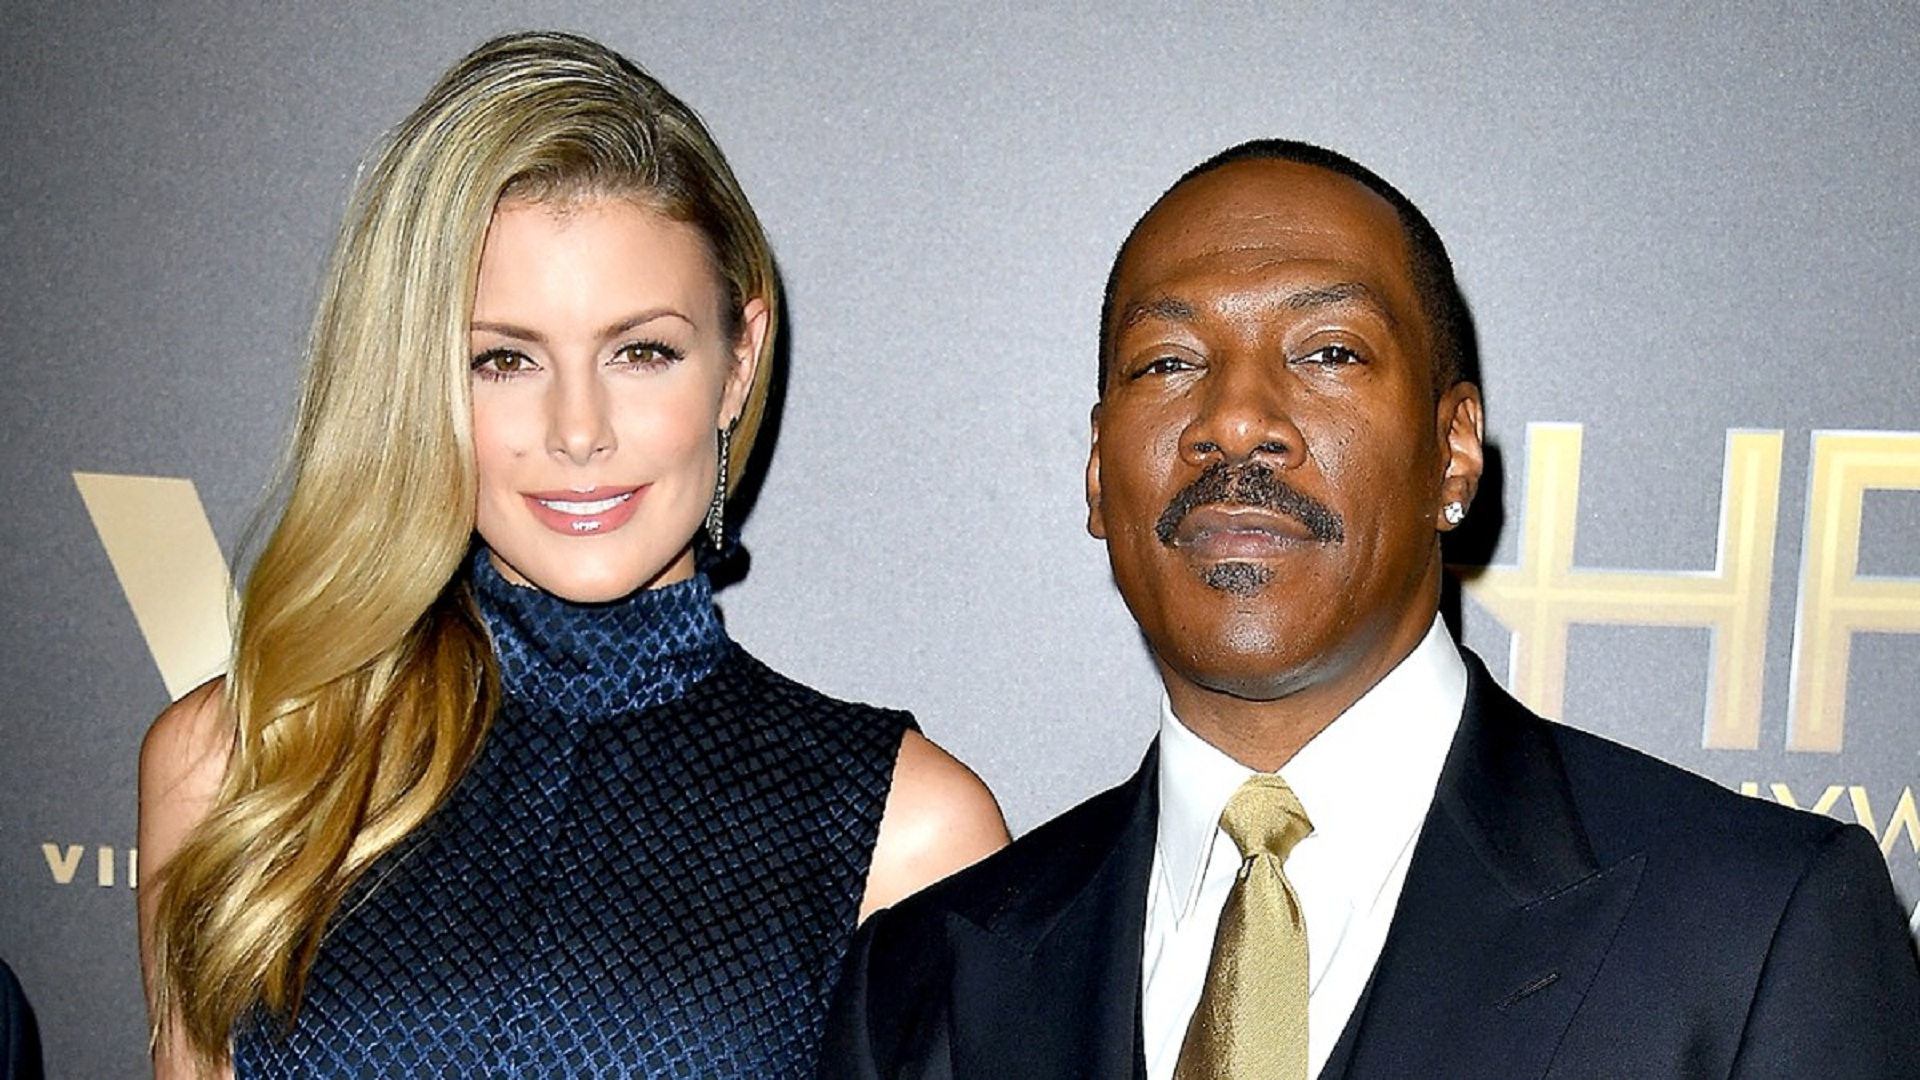 Eddie Murphy Is Expecting his 10th Child Via Partner Paige Butcher!